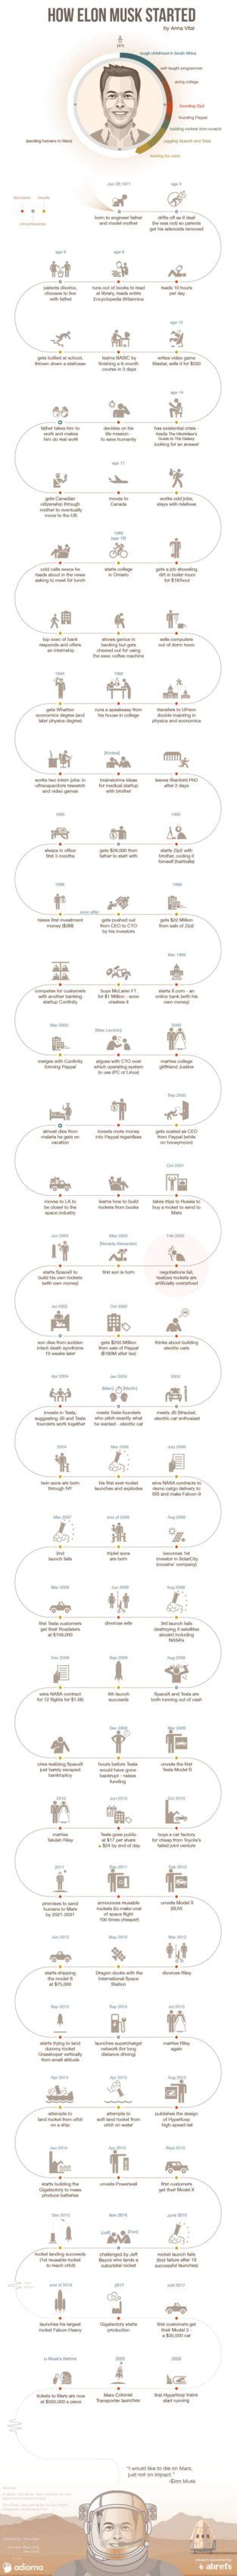 Data Chart A Timeline Of Elon Musk S Race To Greatness Infographic